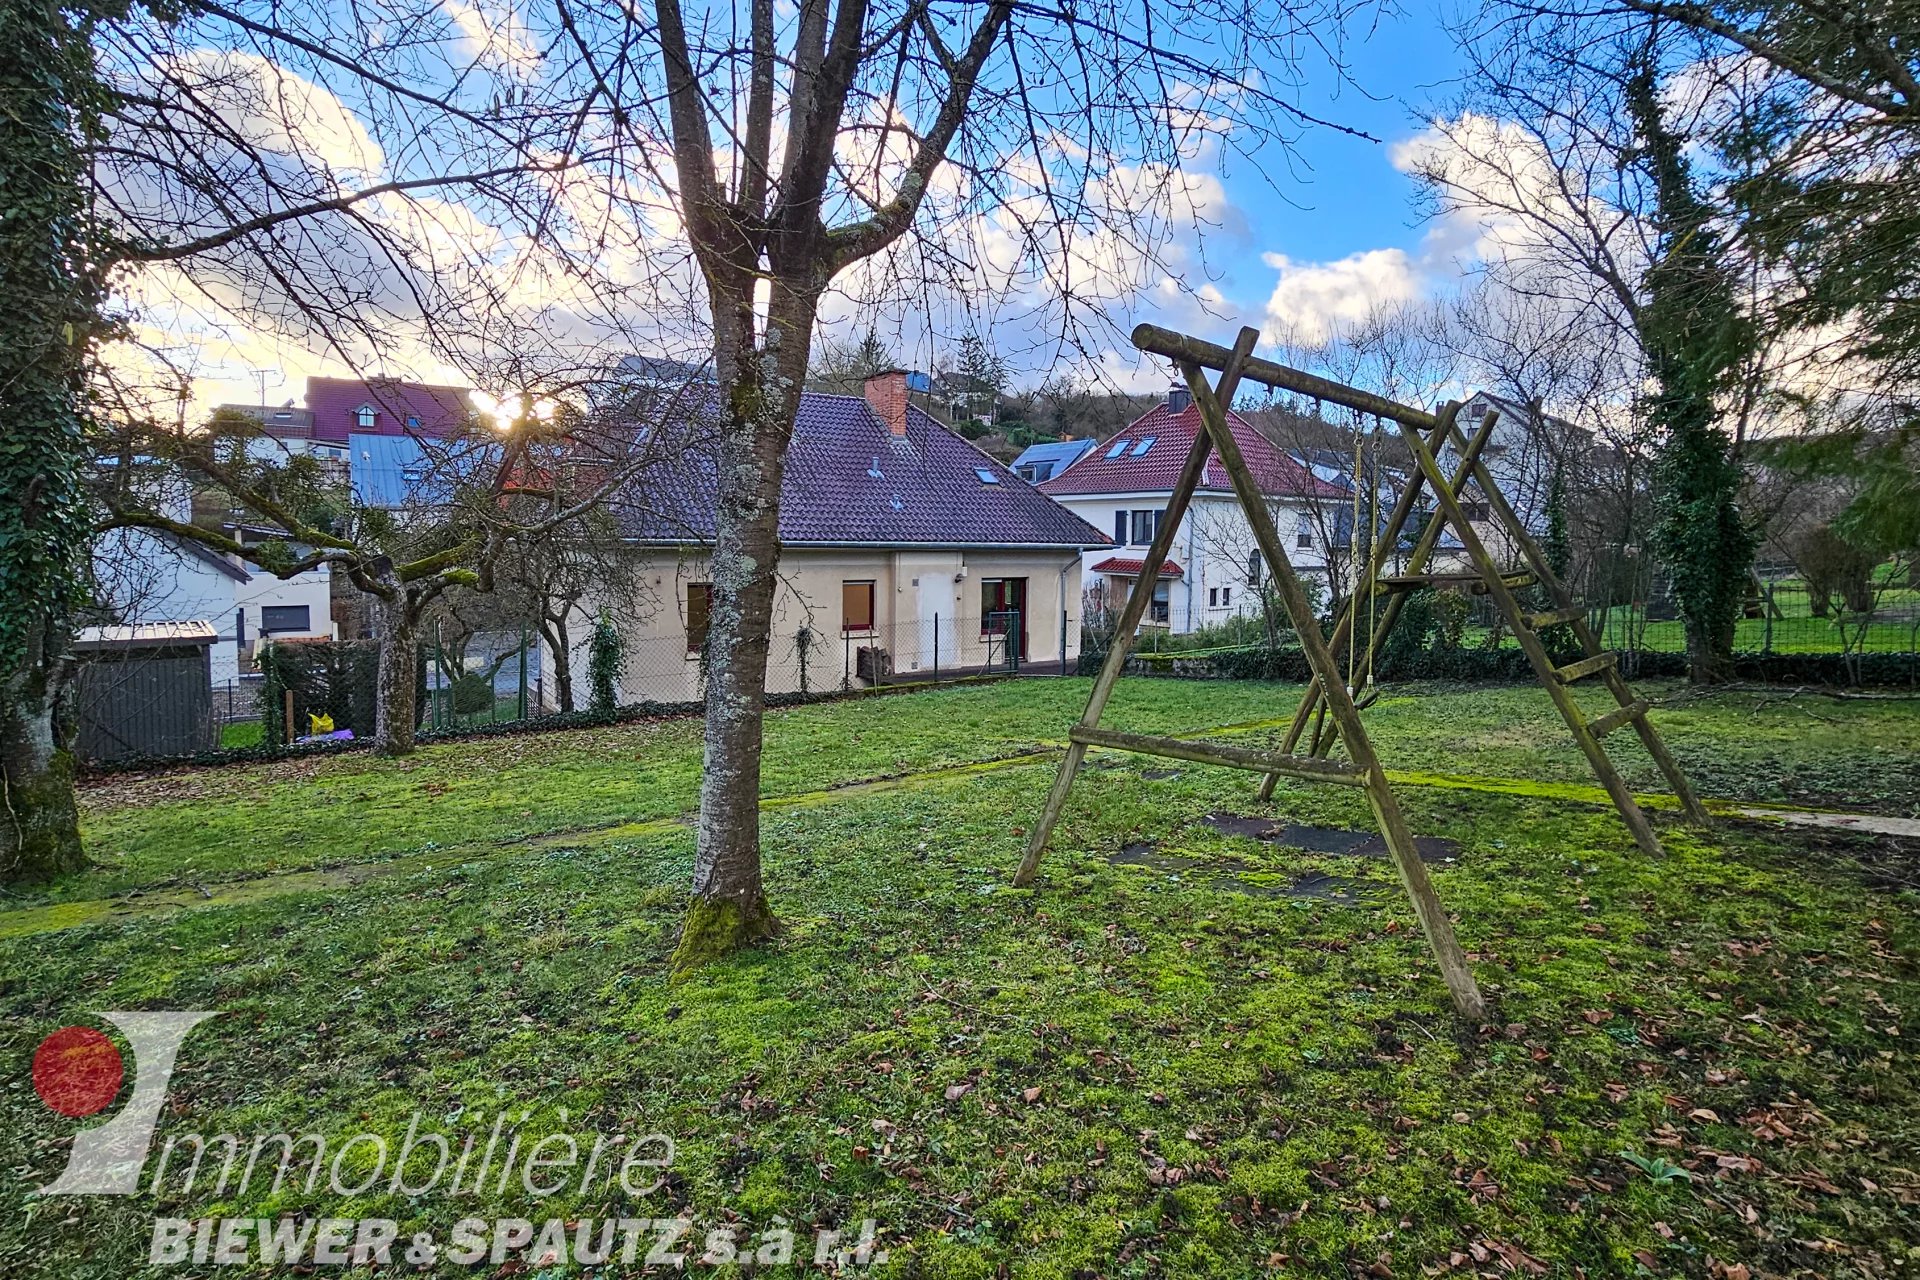 UNDER SALES AGREEMENT - House with 6 bedrooms in Grevenmacher